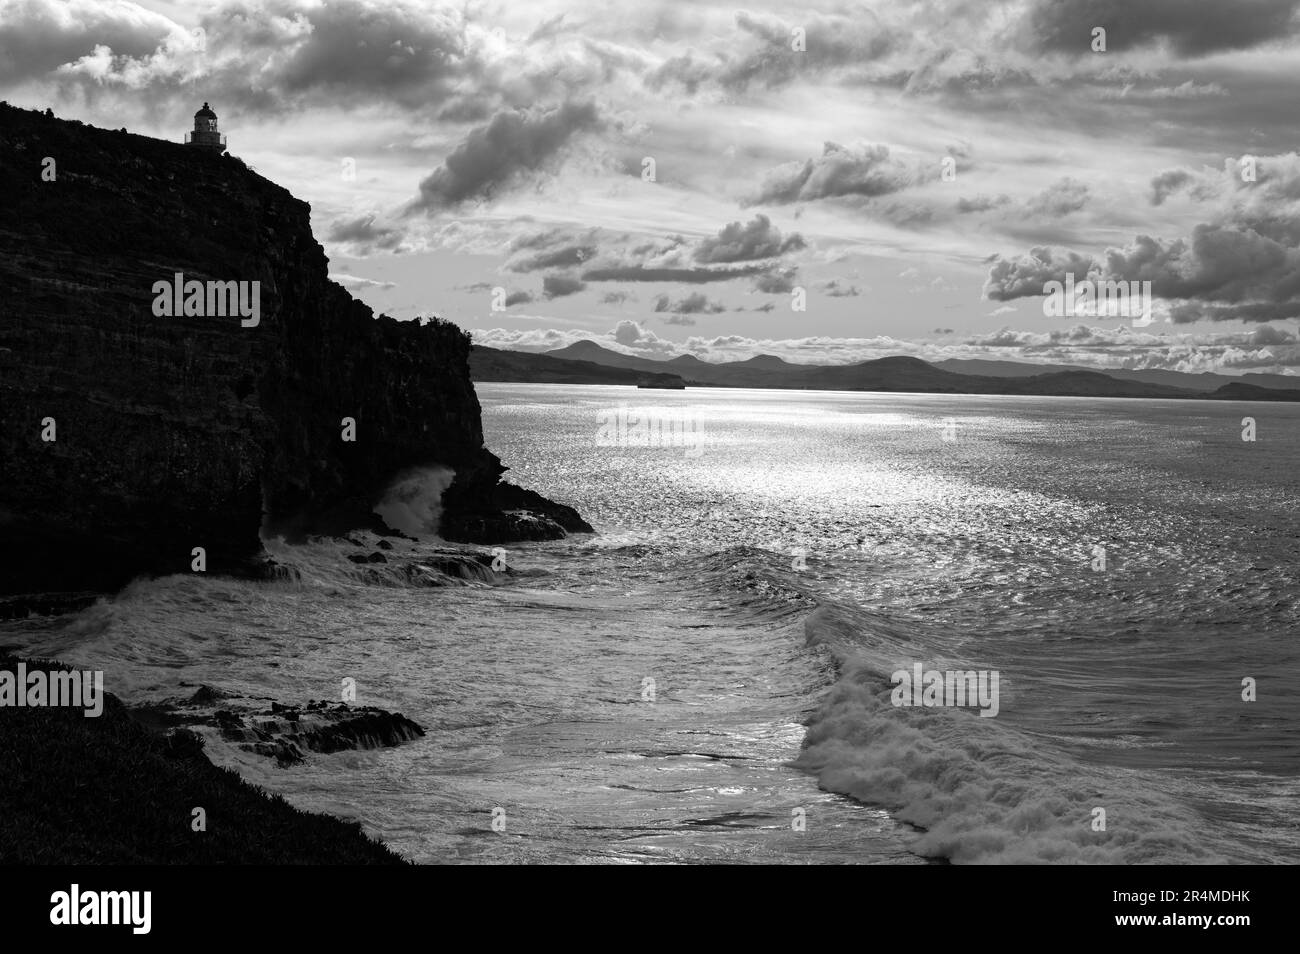 The Taiaroa Head Lighthouse looks out to sea warning of the dangerous cliffs for boats coming into Otago Harbour. Stock Photo